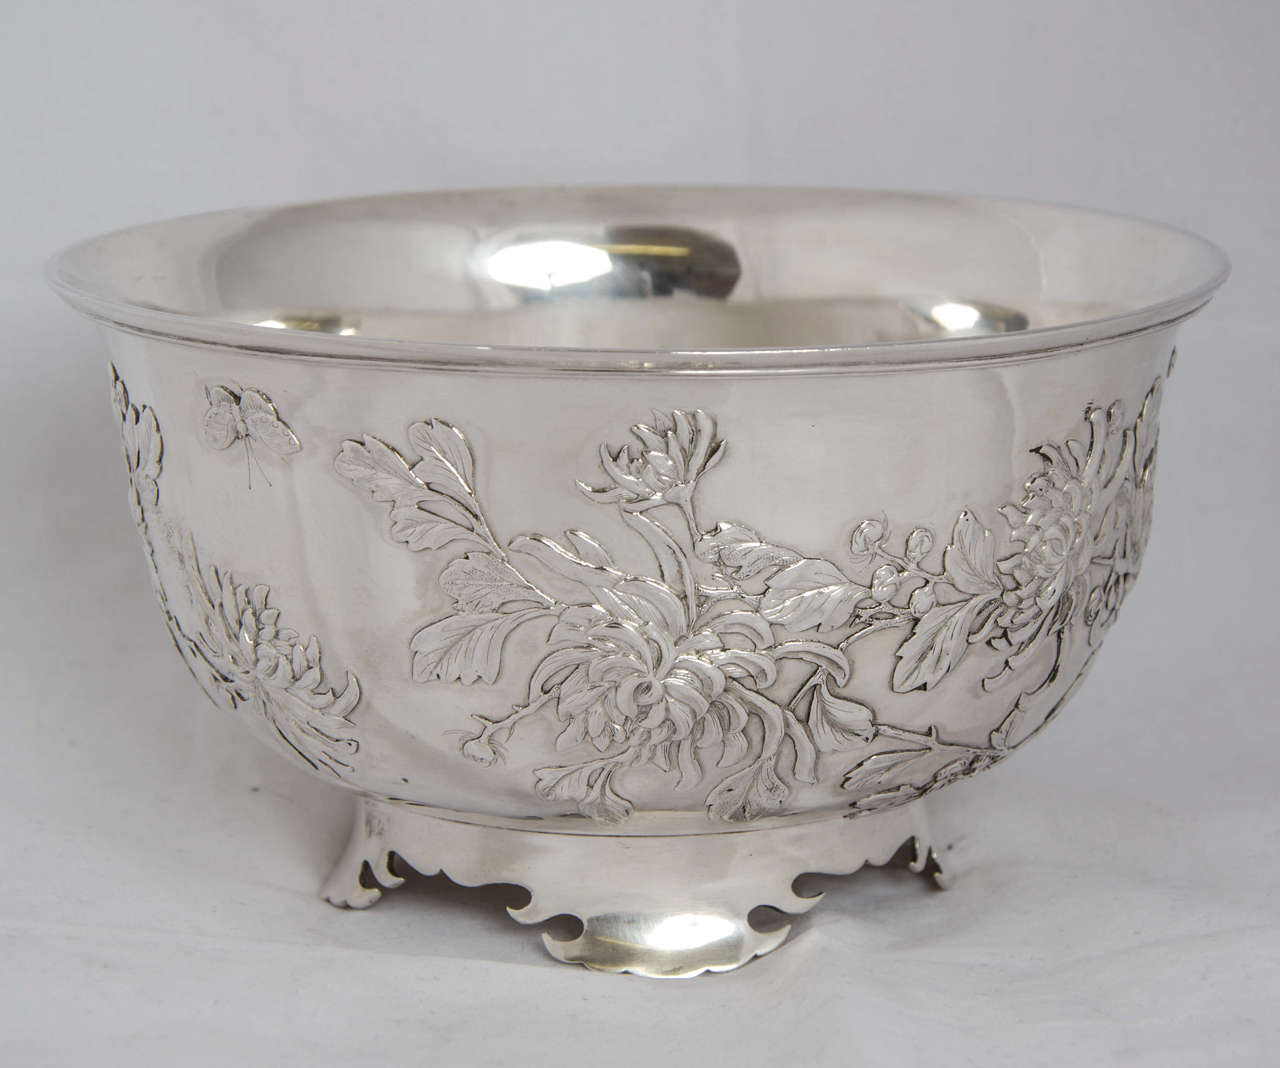 A Chinese export silver bowl made by Wang Hing, circa 1890. The bowl has applied chrysanthemum decoration as well as two butterflies, one to either side.
The diameter is 19 cm and the weight is 641 gm.